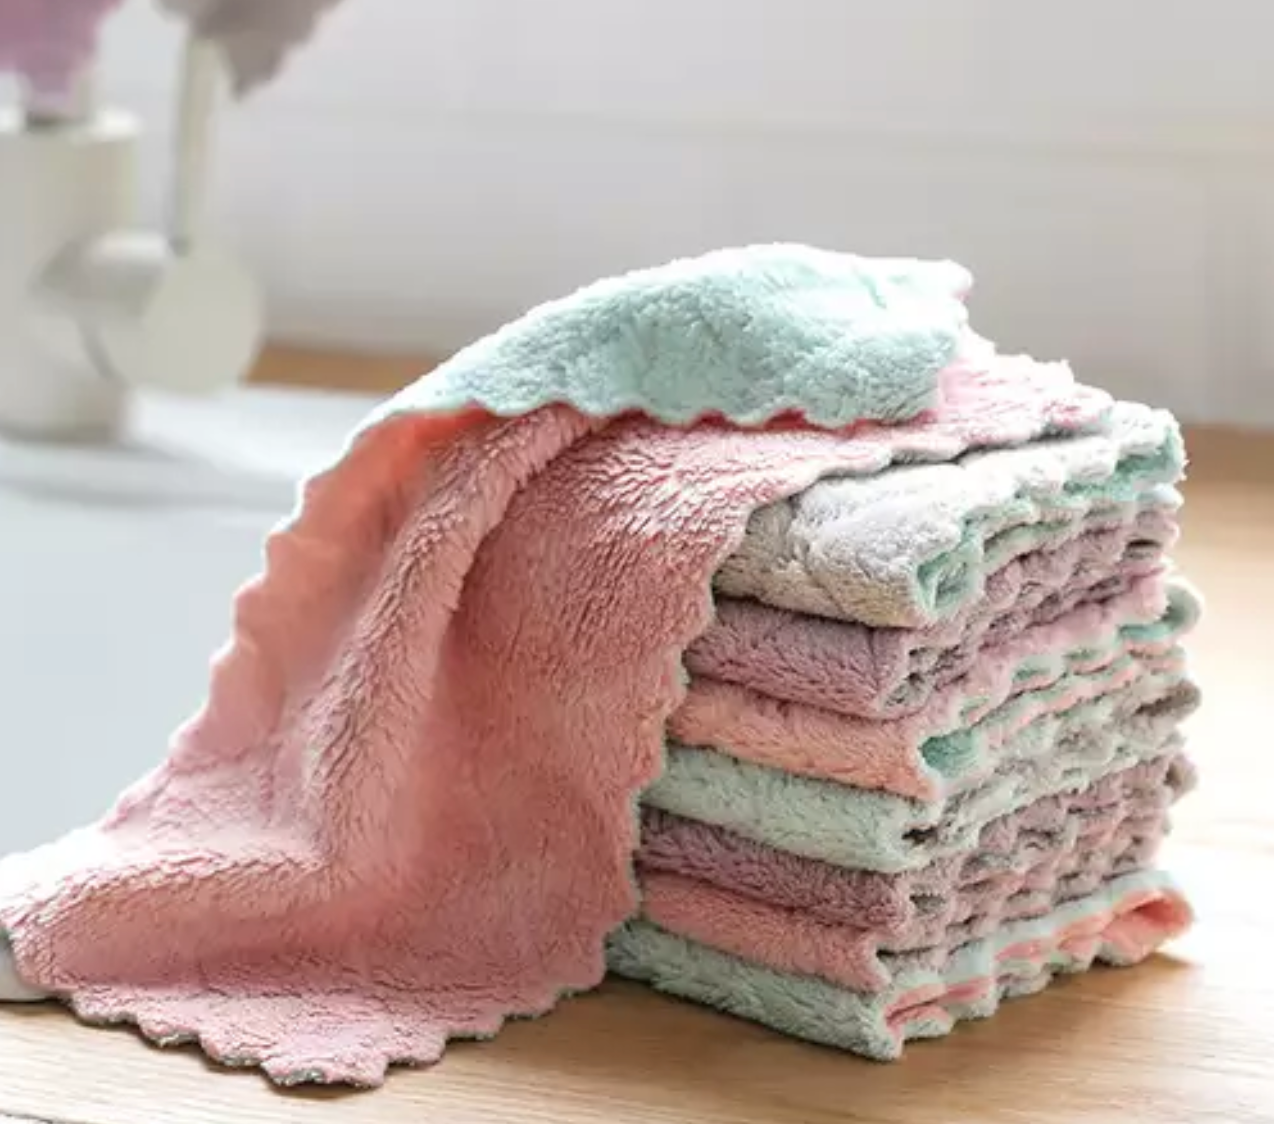 Cleaning Towel